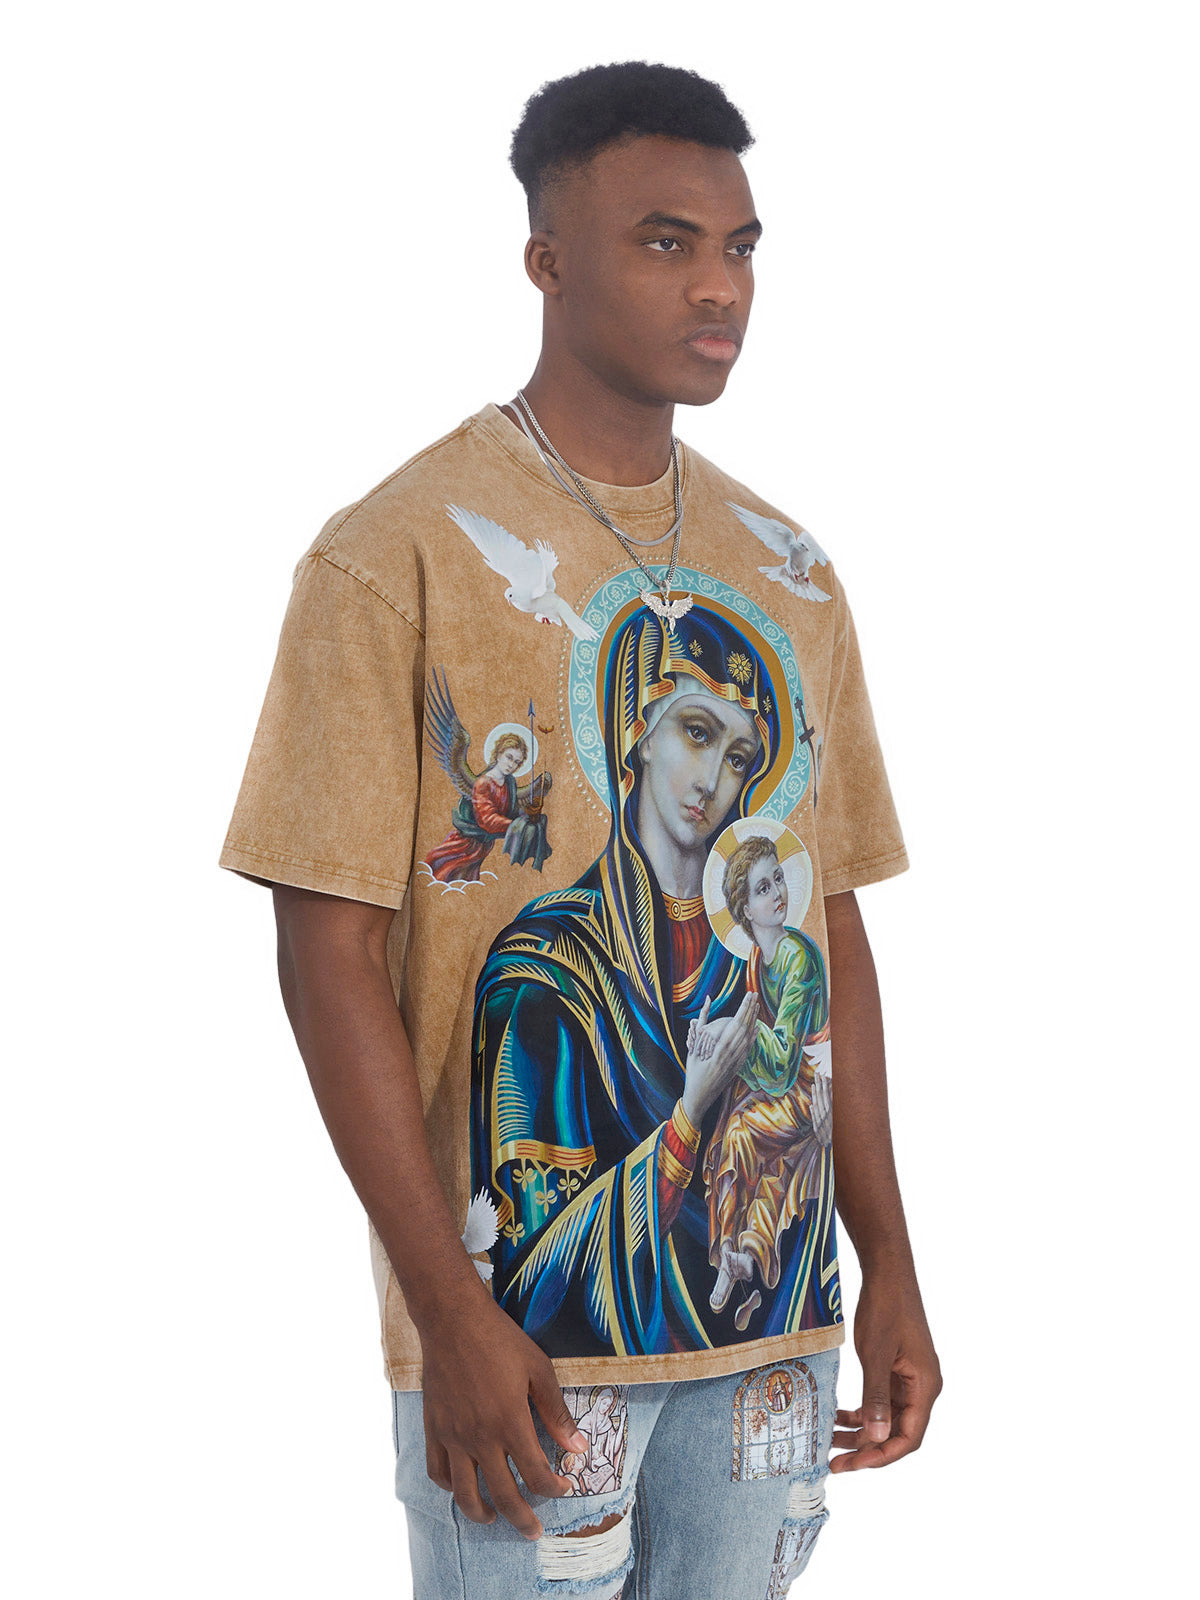 OBSTACLES & DANGERS© Madonna and Child T-SHIRT Available in 7 Colors